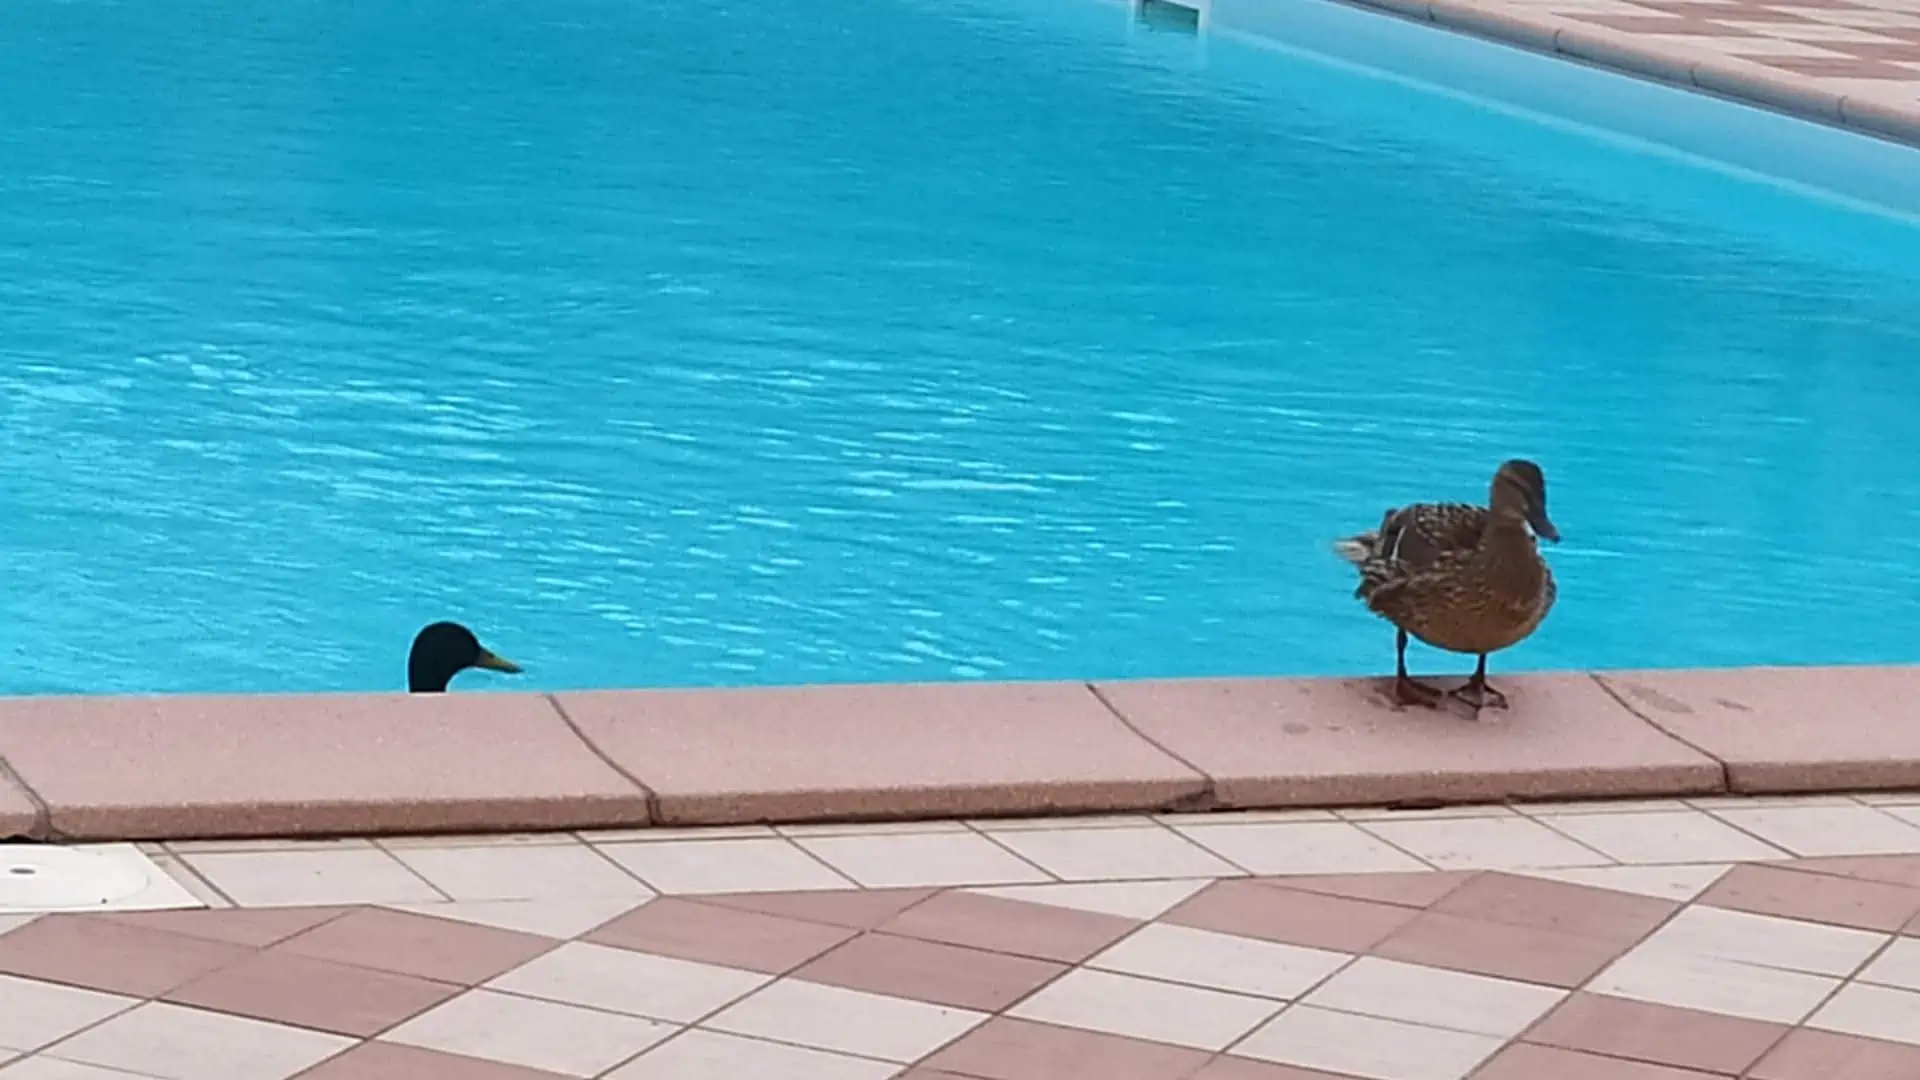 How To Keep Ducks Out Of Pool Area – 11 Useful Tips